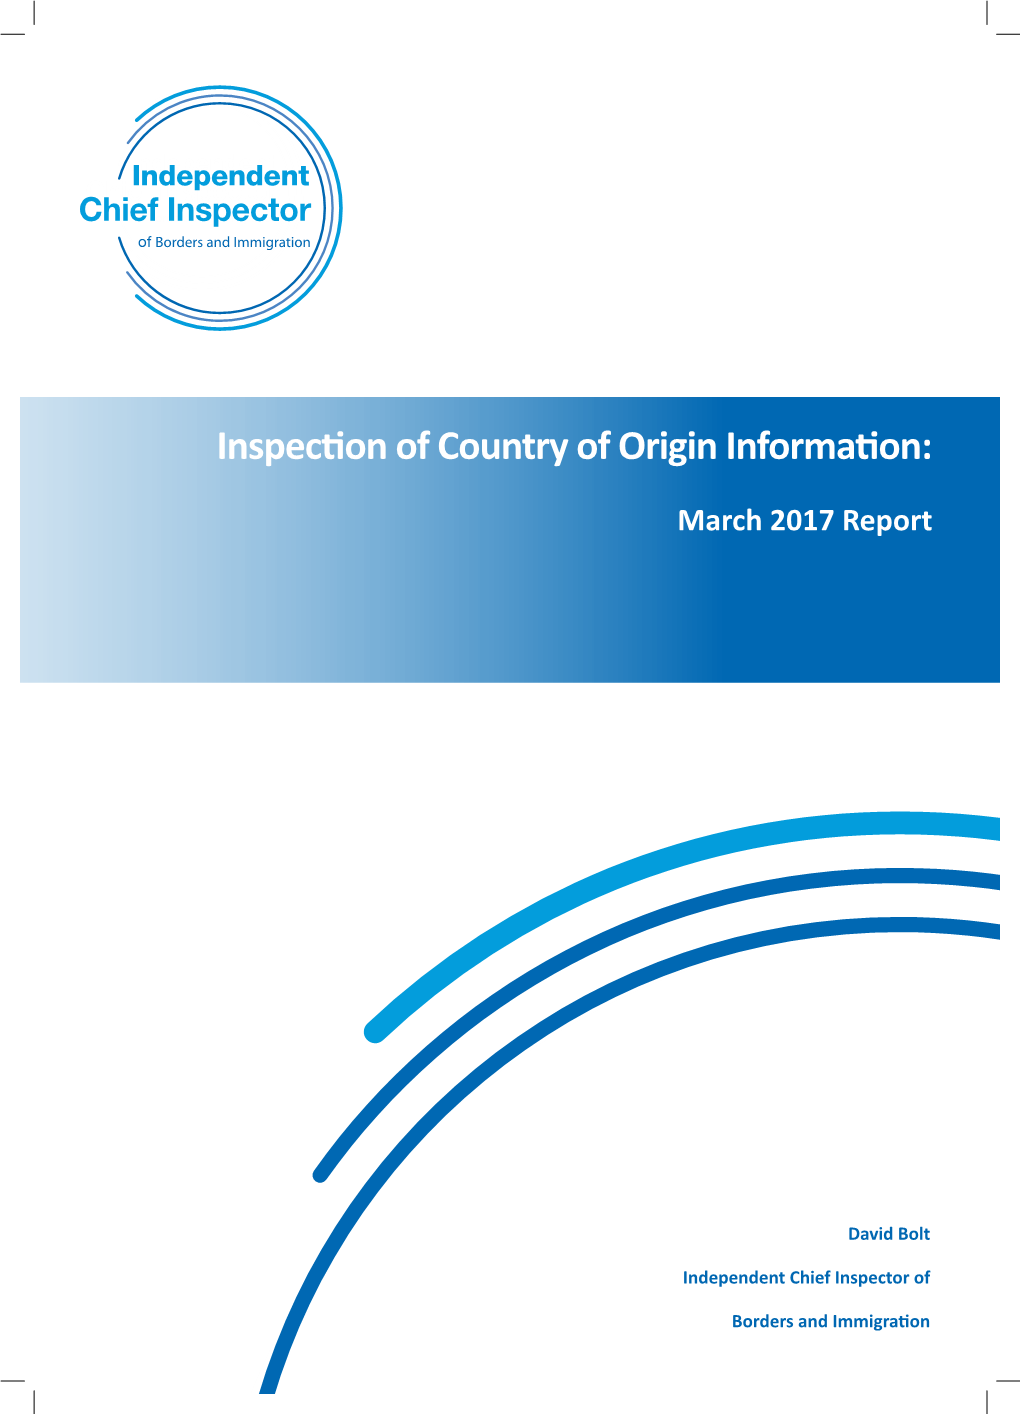 Inspection of Country of Origin Information